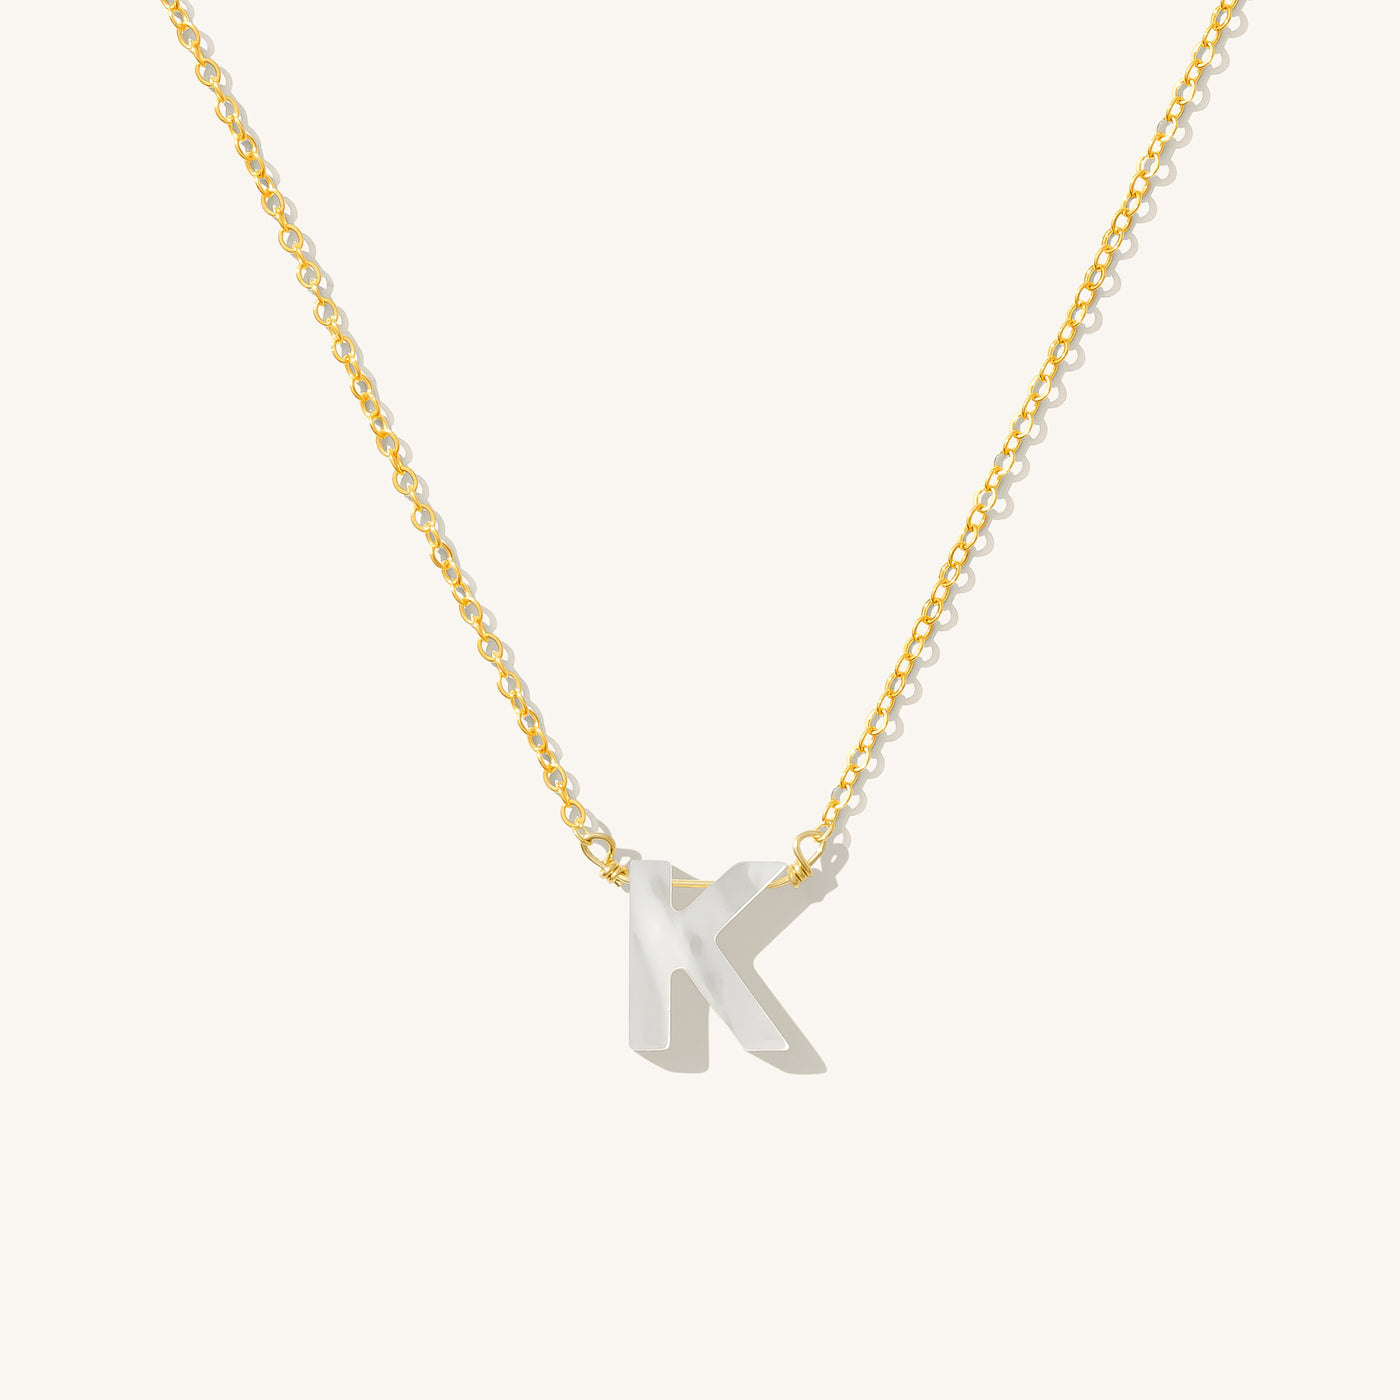 K Pearl Initial Necklace